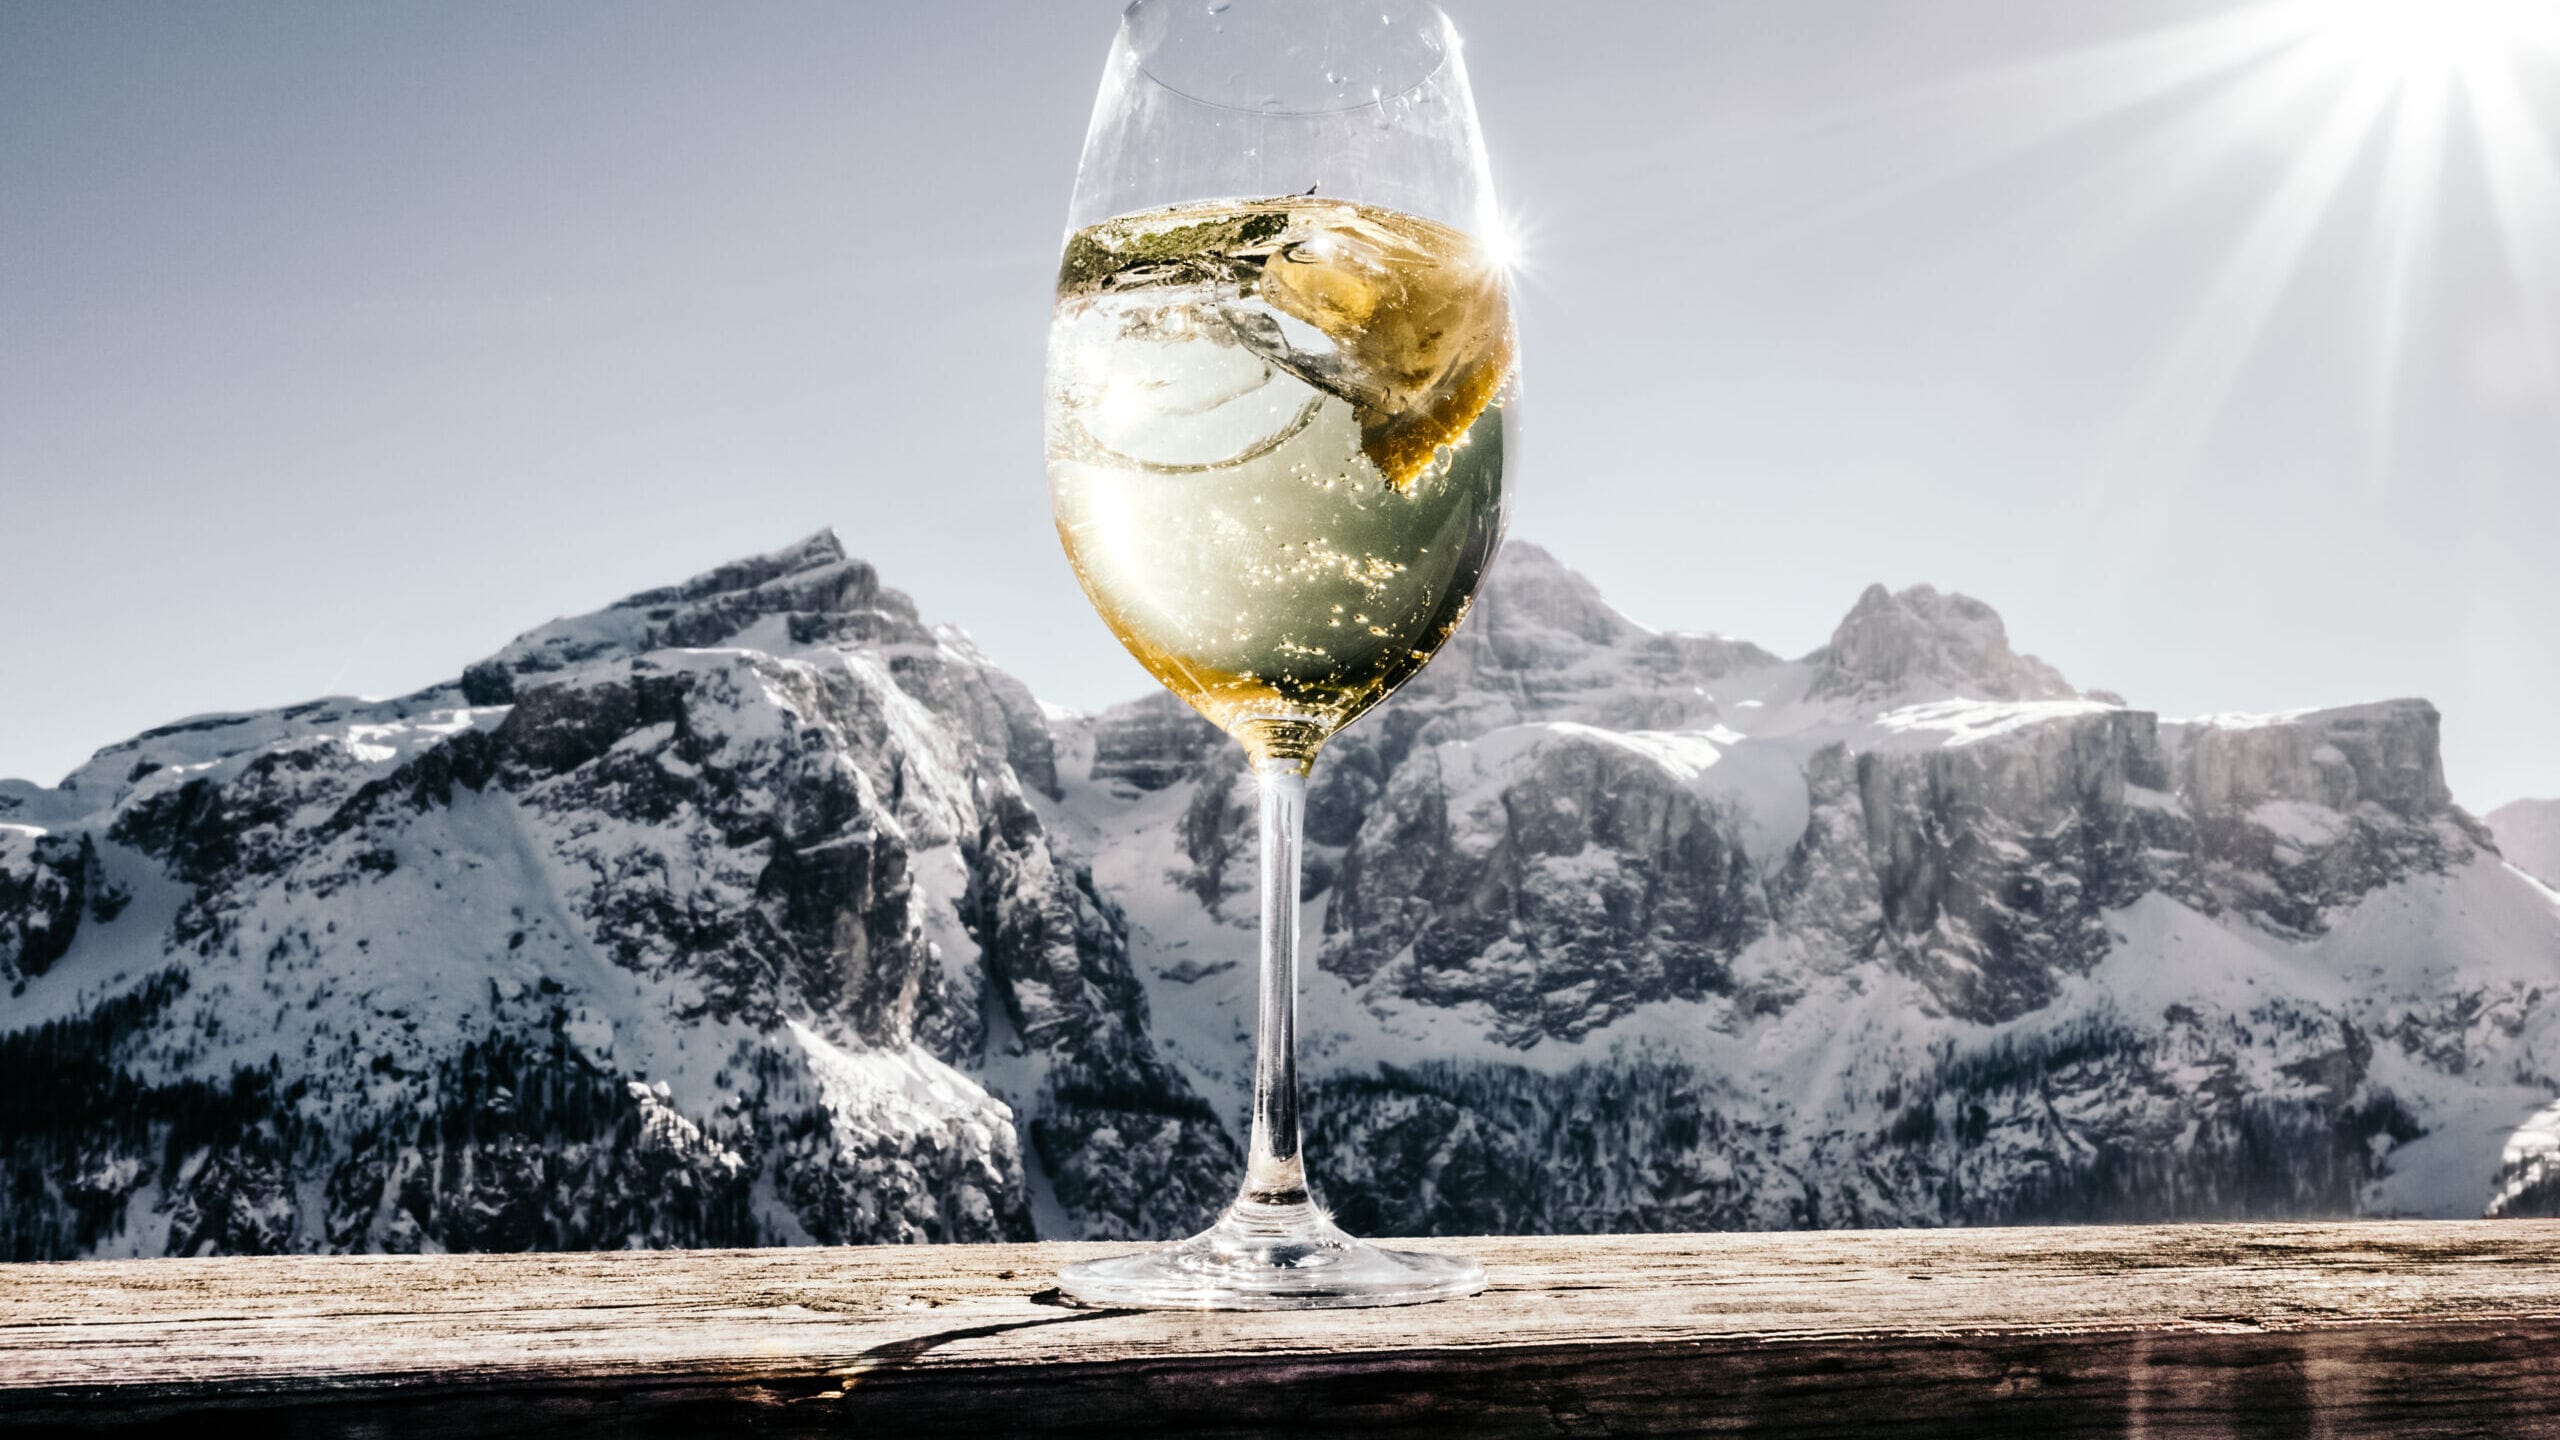 Sipping wine with view on the Sella Massiv in the Italian Alps